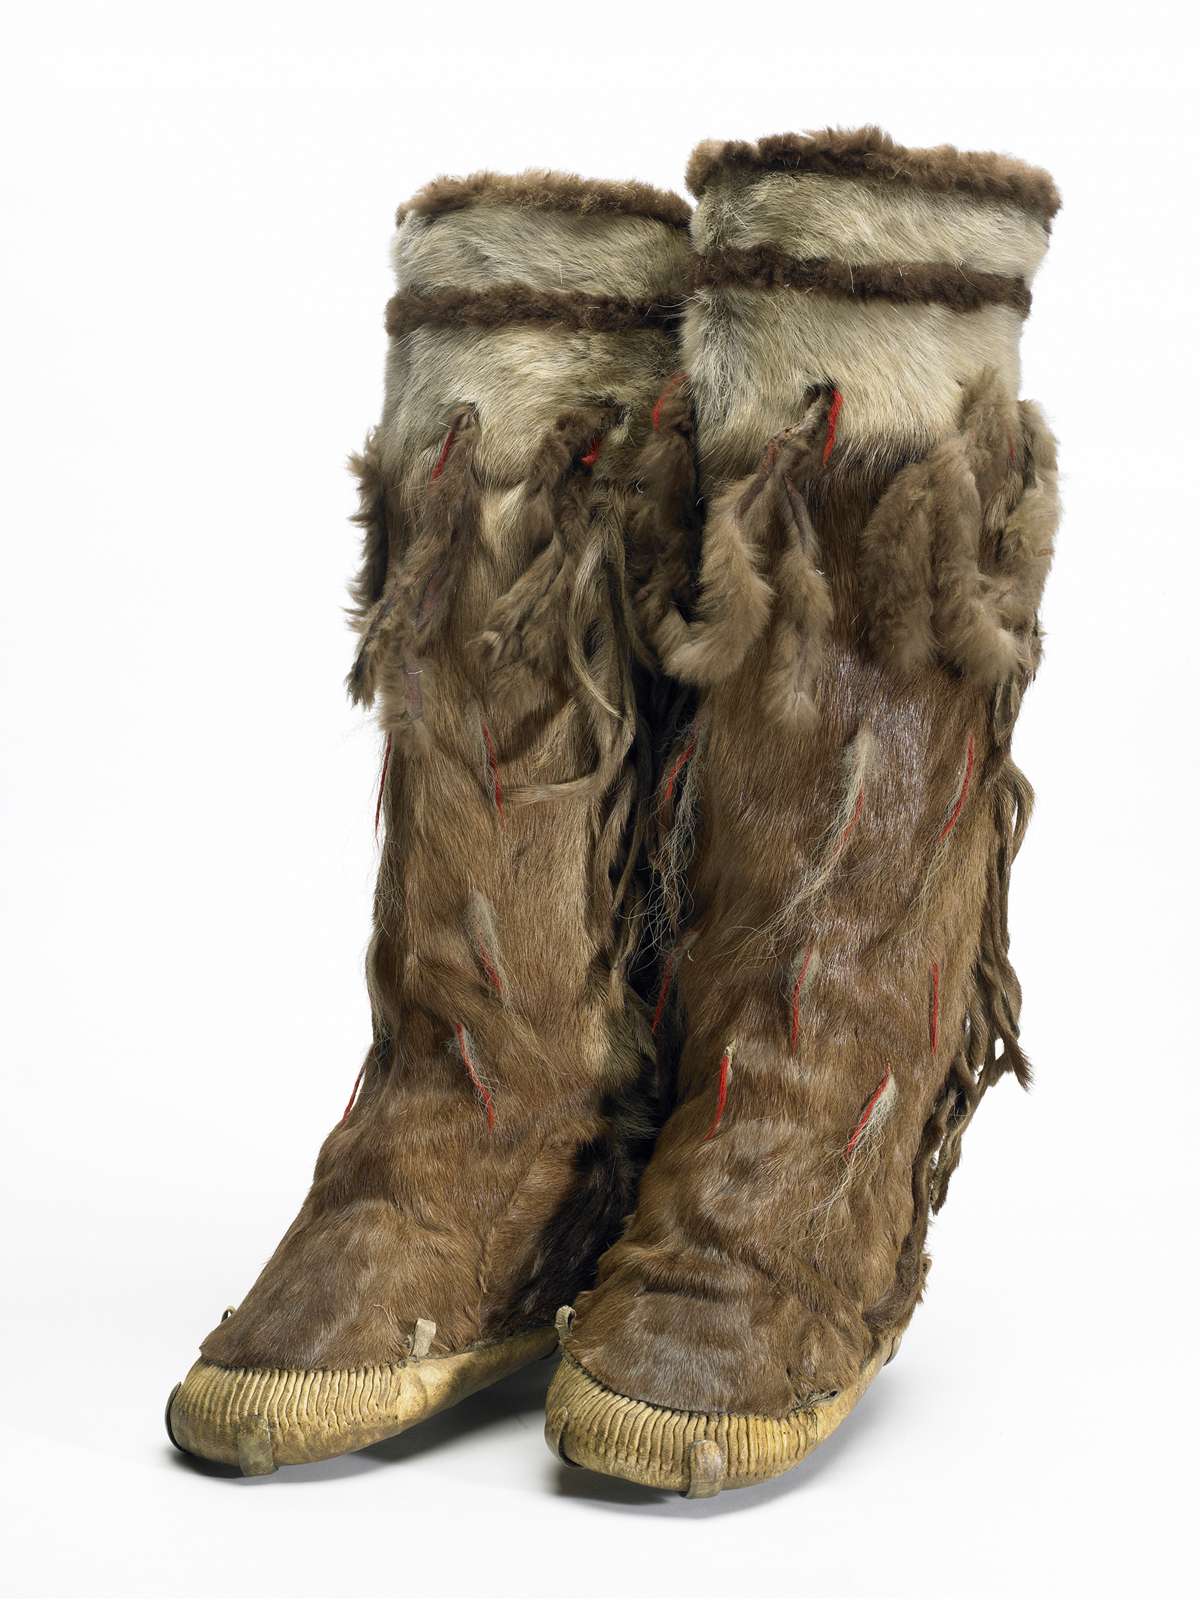 animal skin shoes worn by inuit